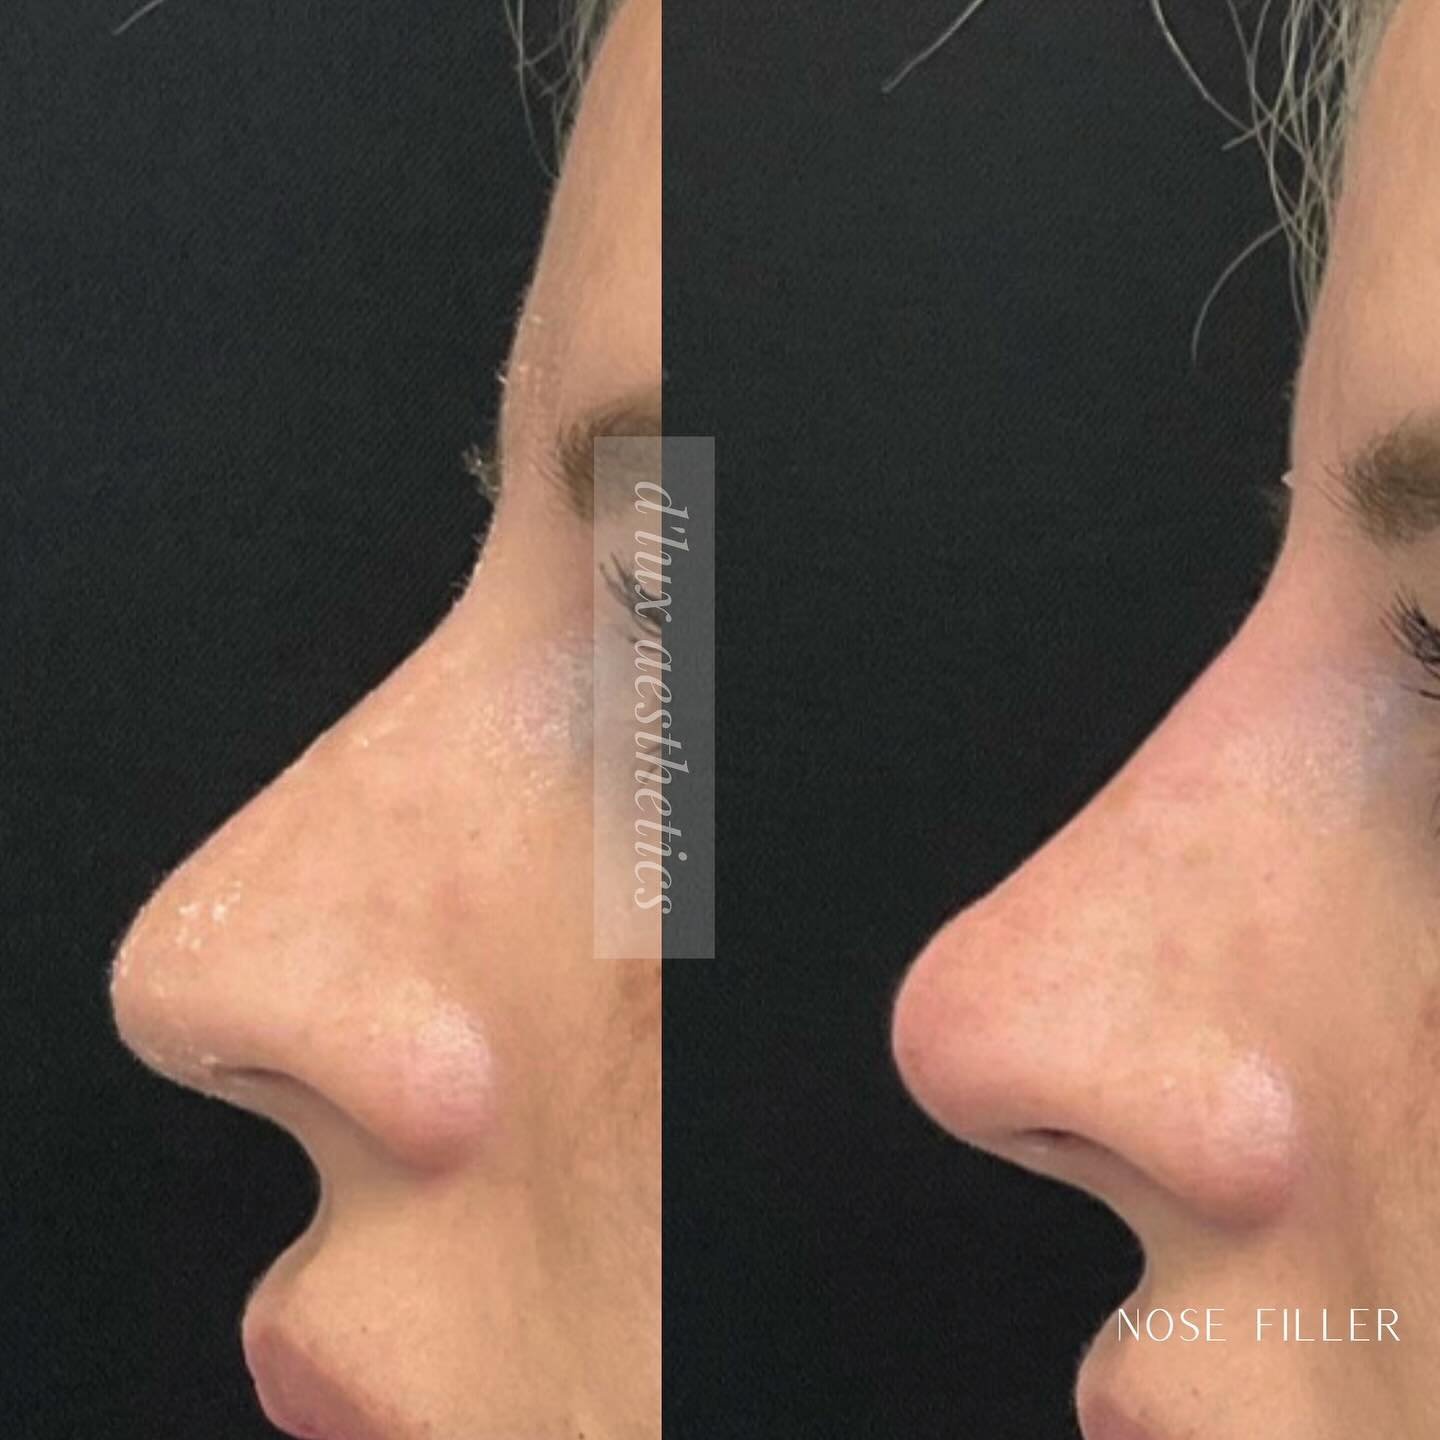 What are Nose Fillers? 👃🏼👇🏼

Nose fillers are injectable substances used to enhance specific areas of the nose. They&rsquo;re typically made of hyaluronic acid (HA), a naturally occurring sugar molecule that adds volume and hydration.

Remember: 